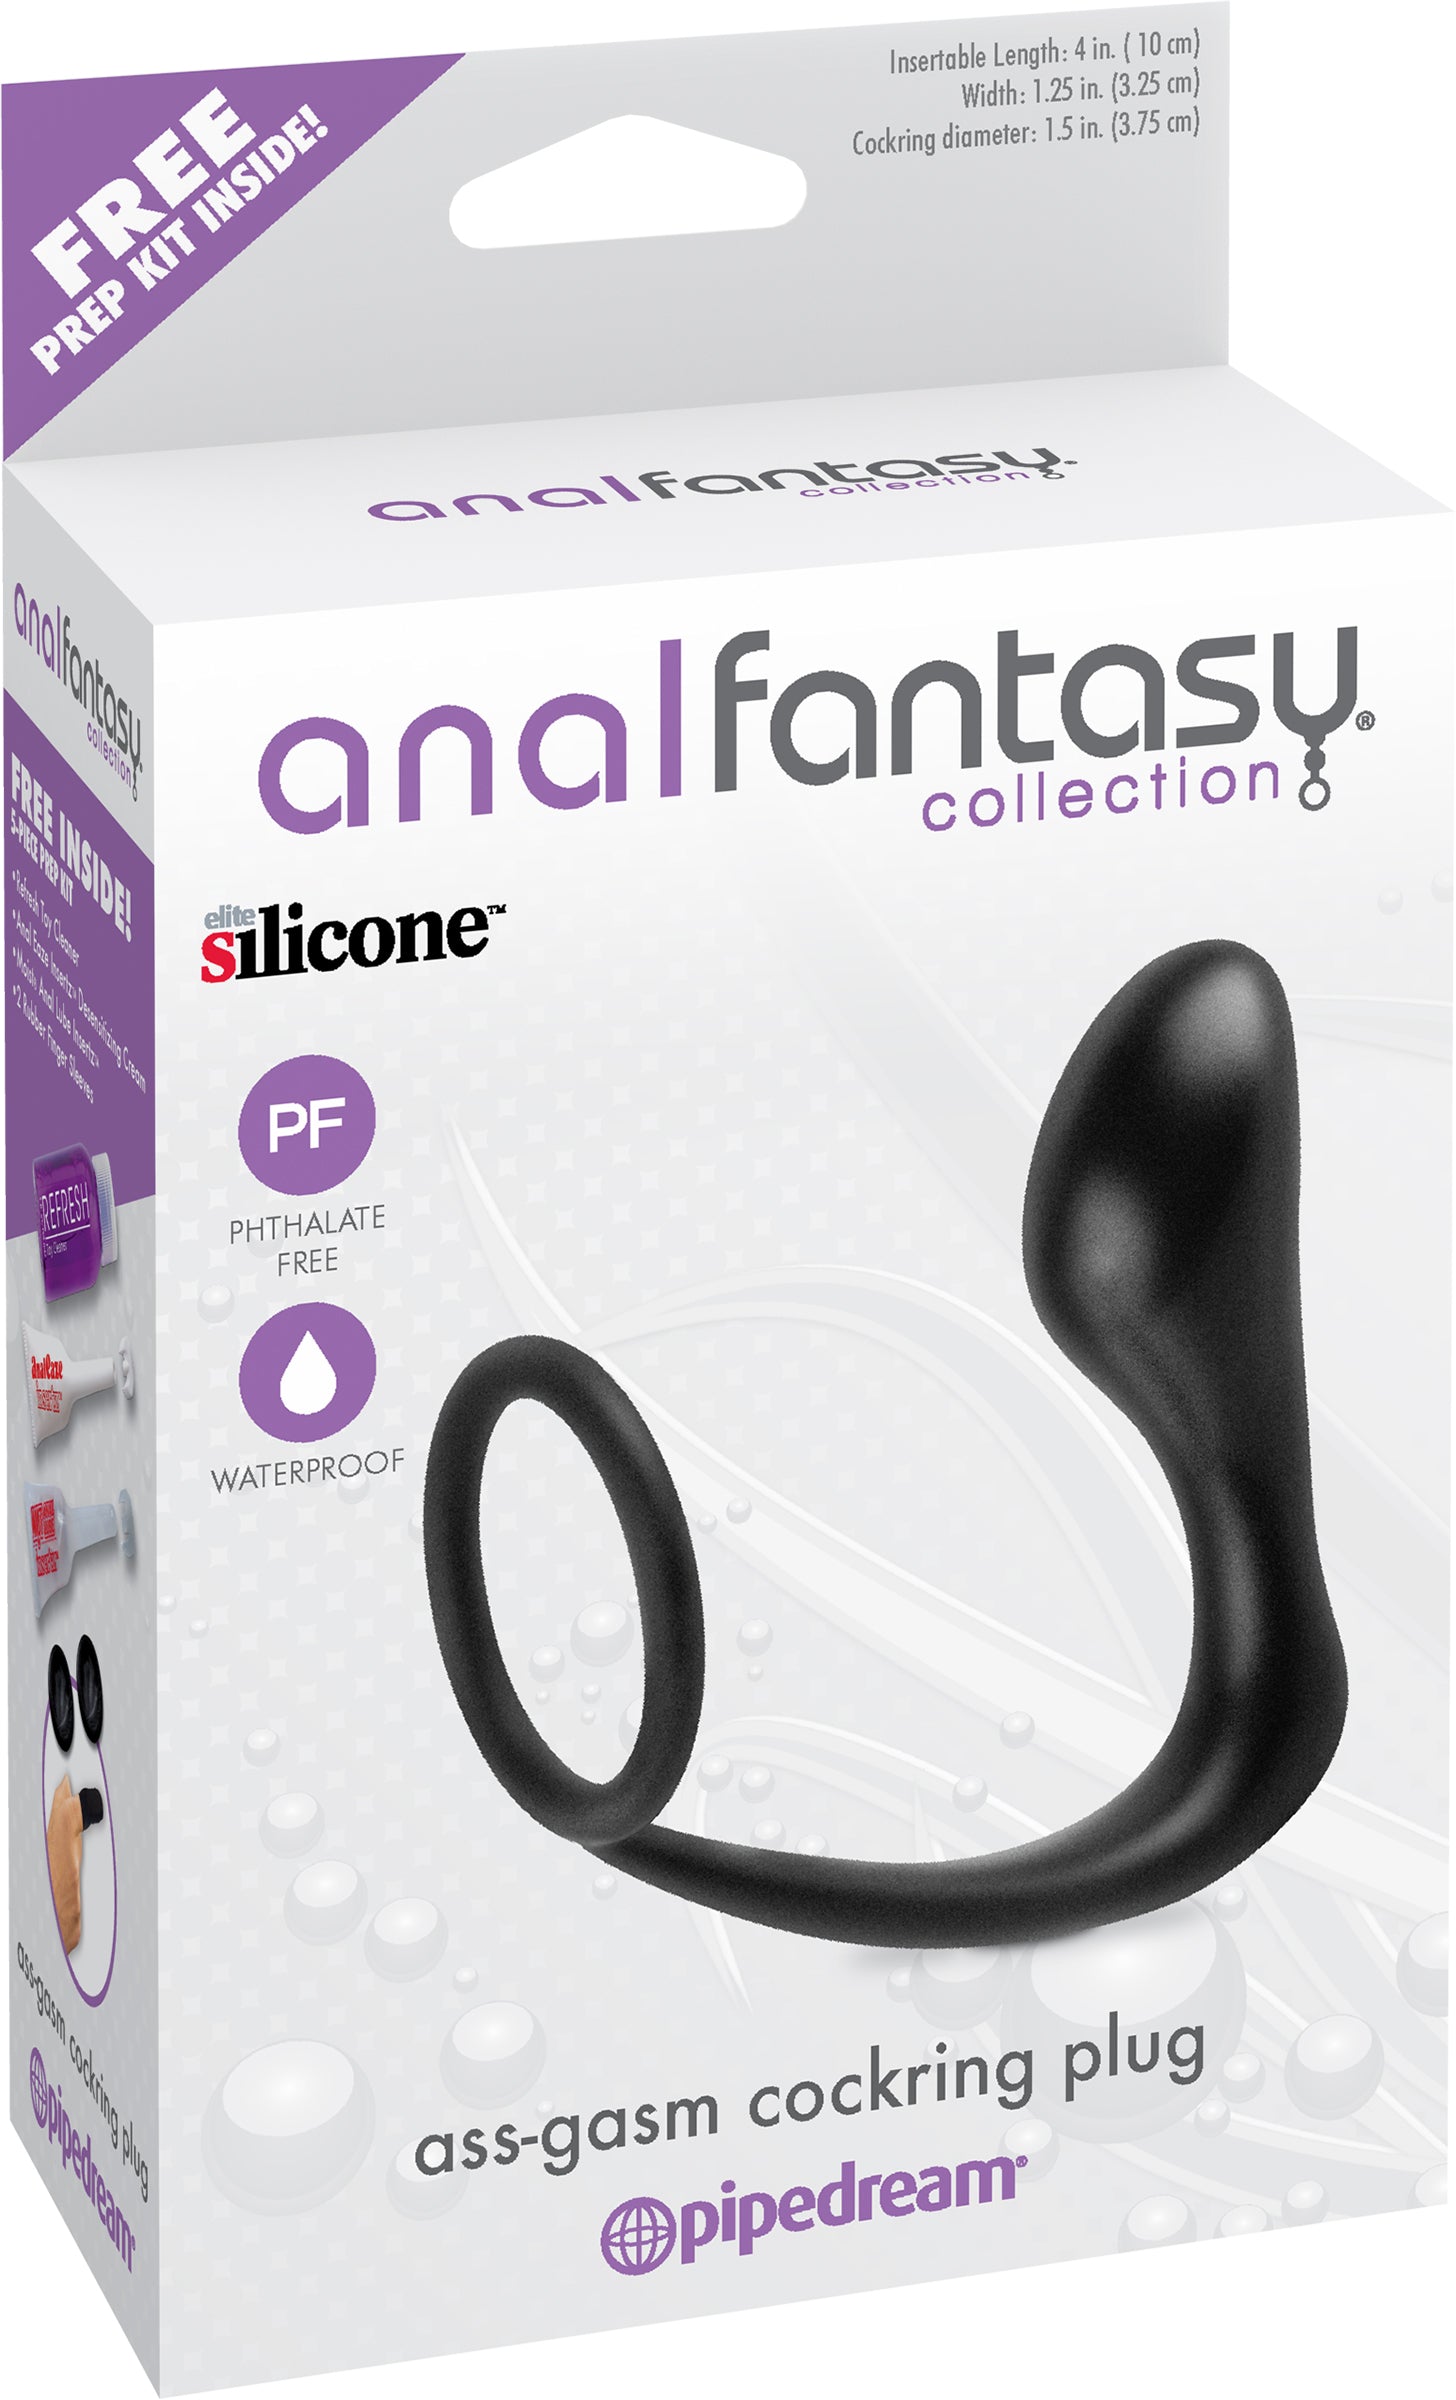 Anal Fantasy Ass-gasm Cockring Plug Pipedream Products